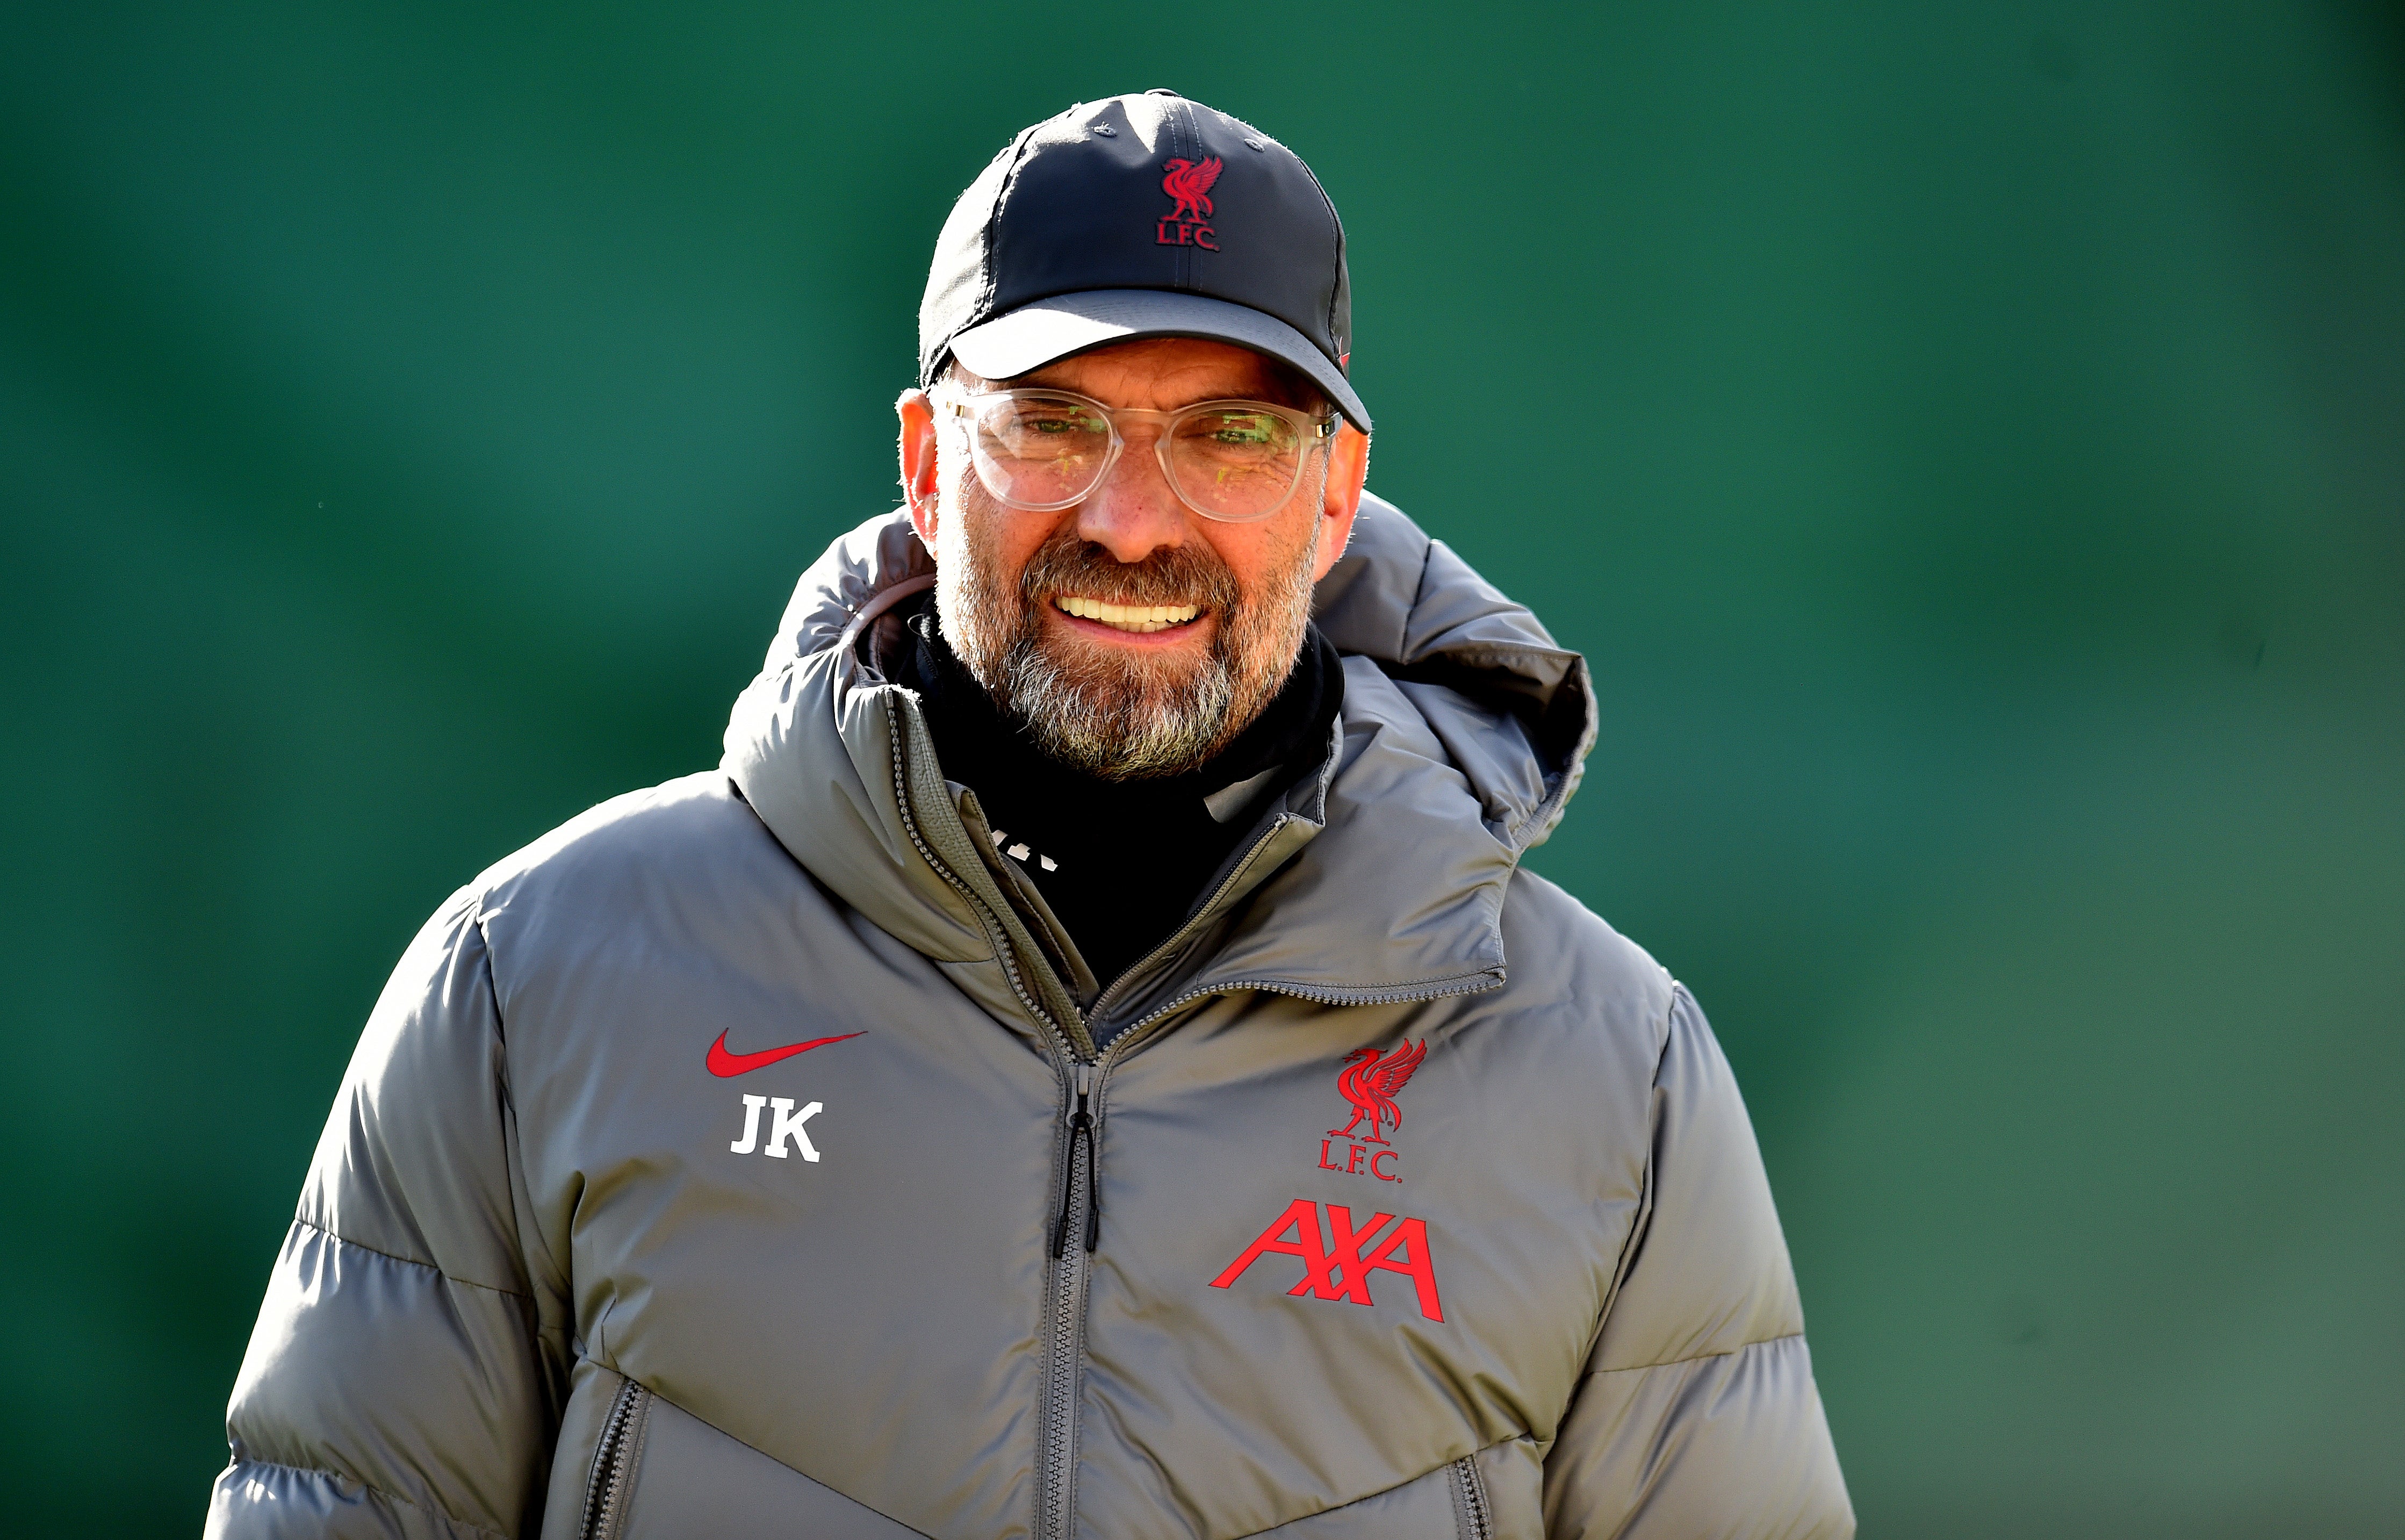 Klopp is used to bouncing back from defeats and setbacks